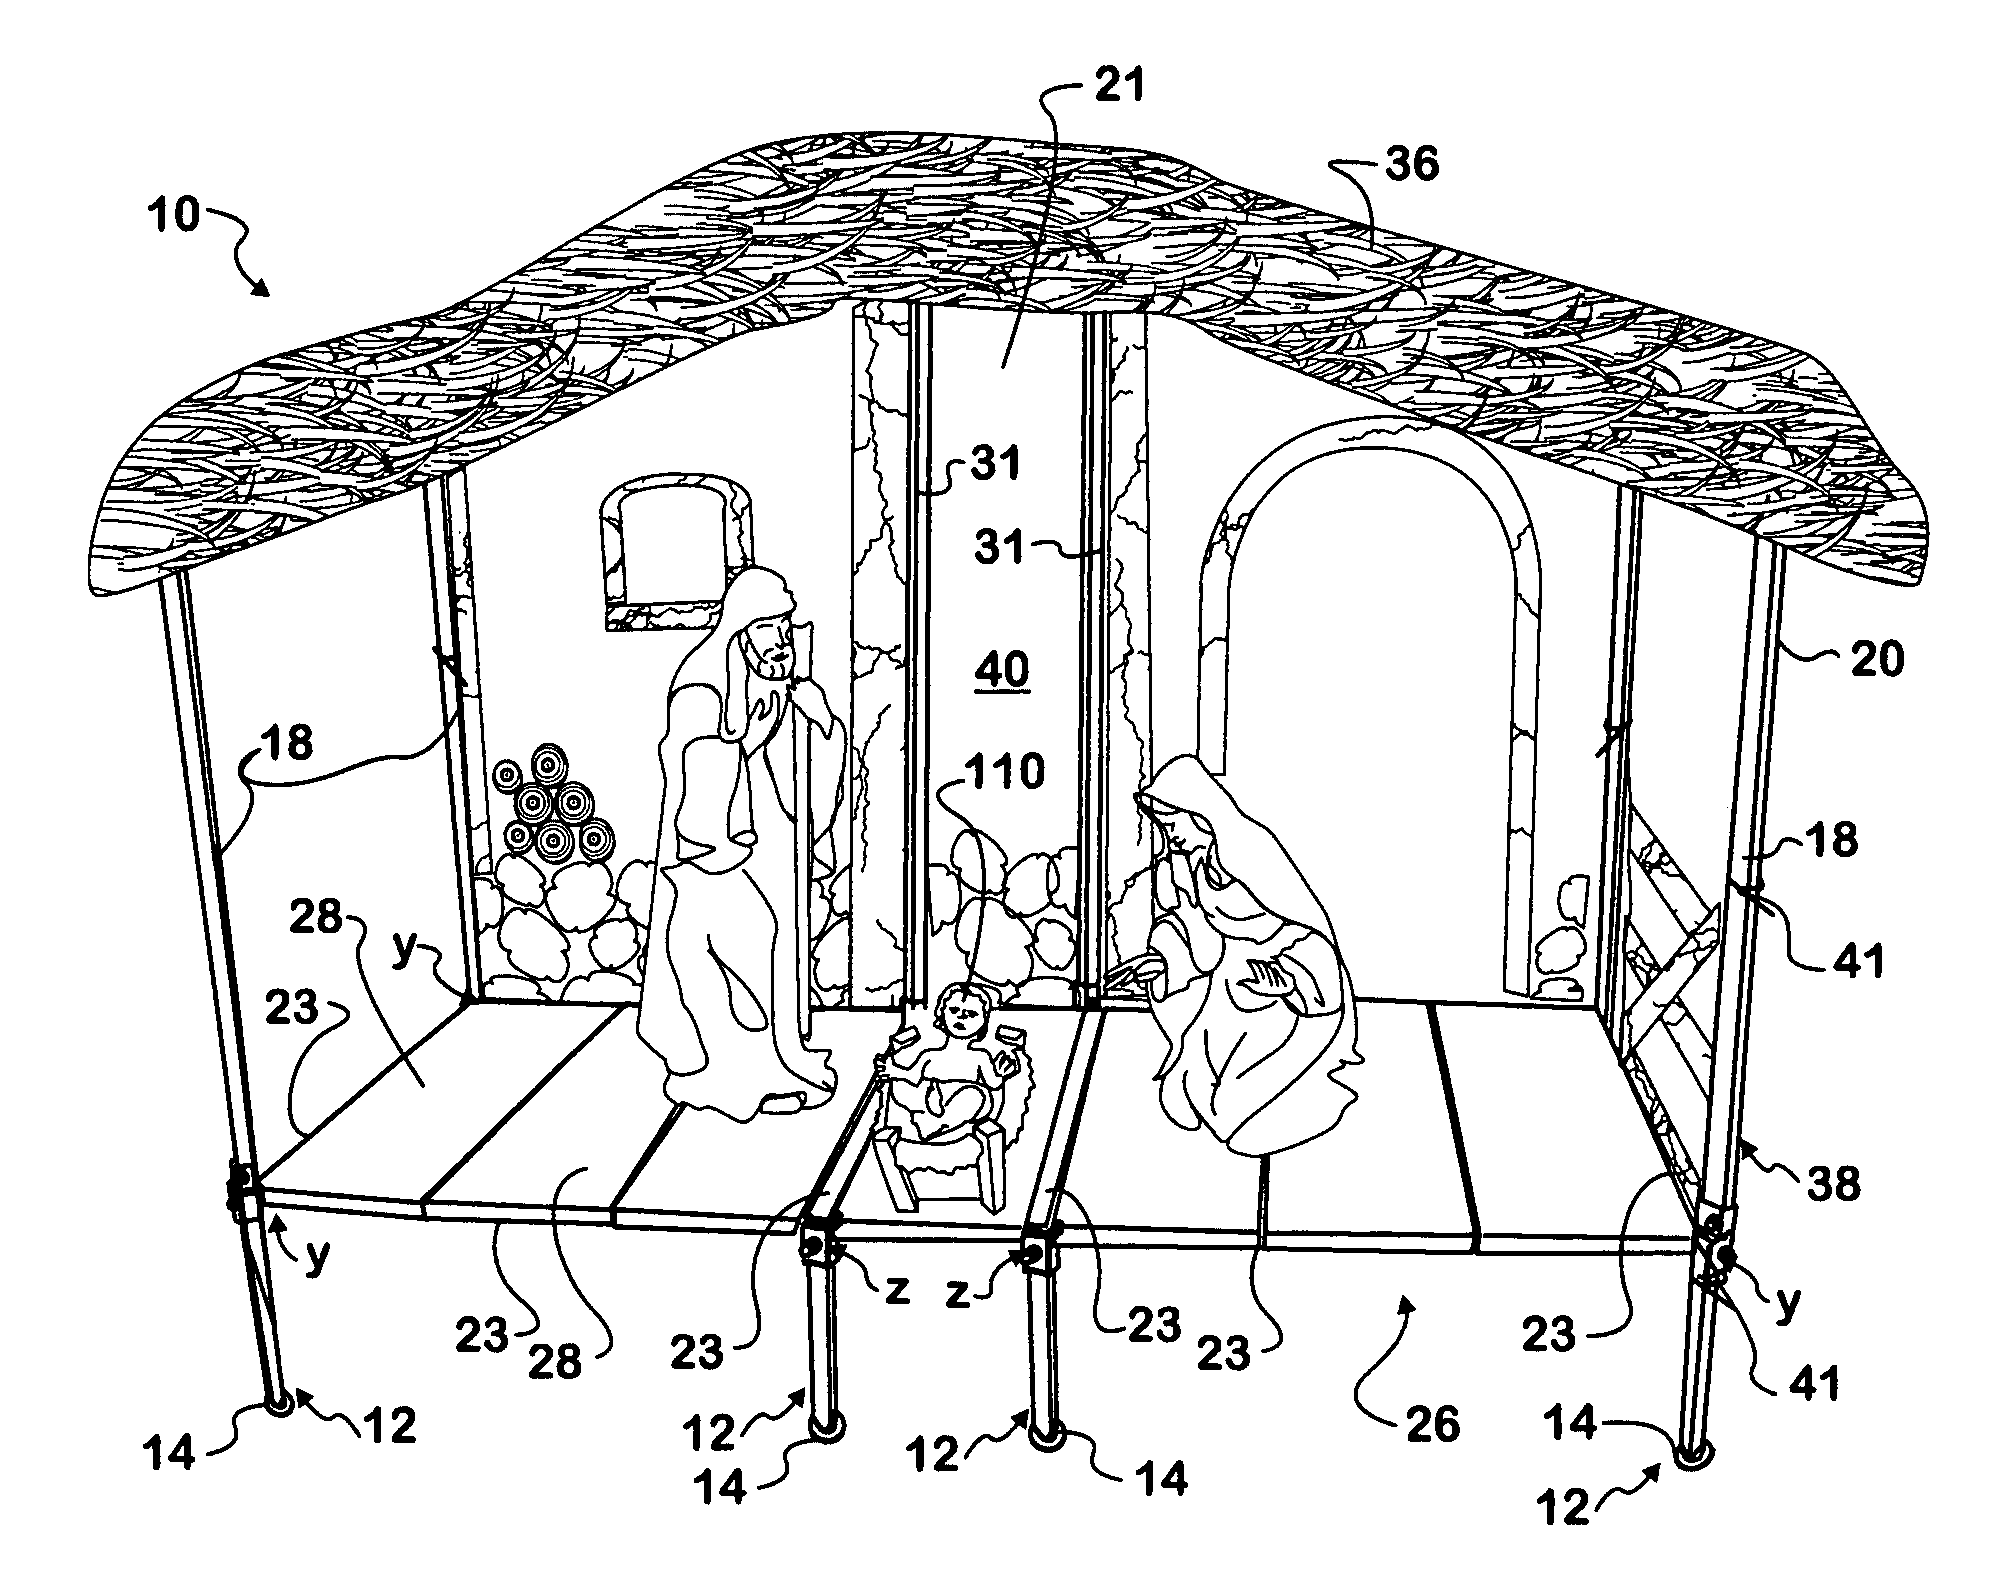 Nativity stable structure and kit for same